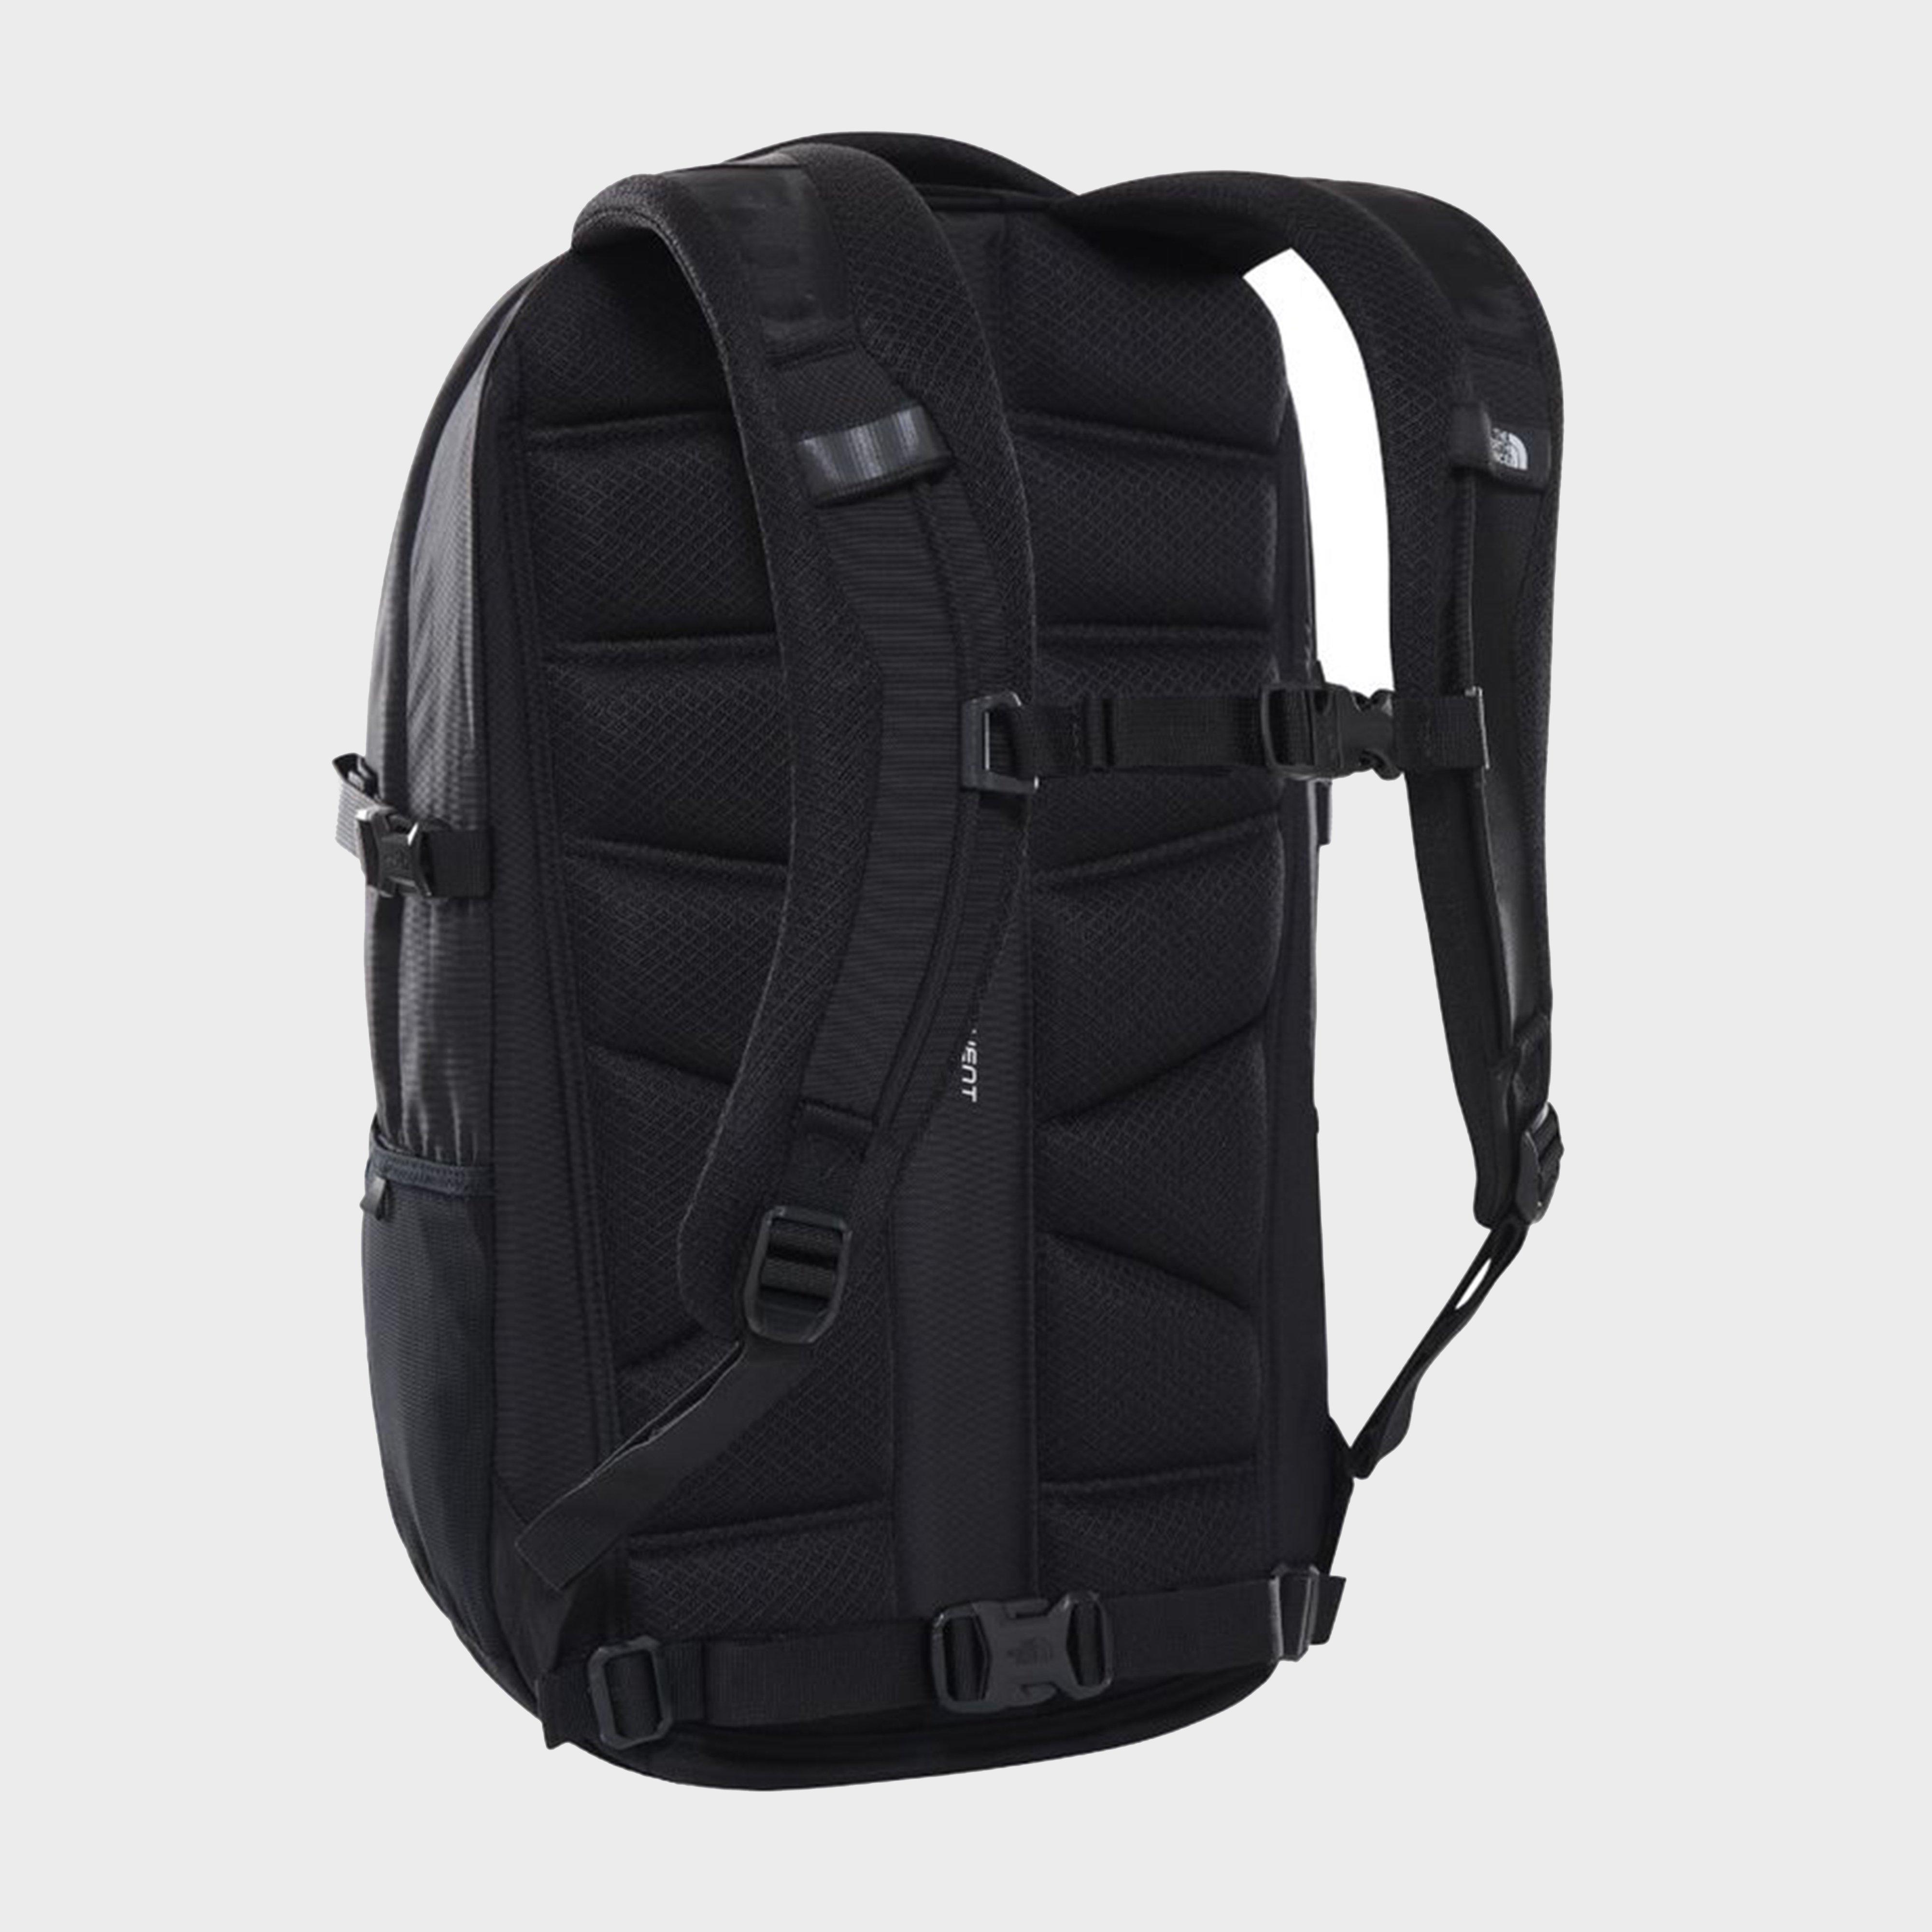 the north face fall line backpack